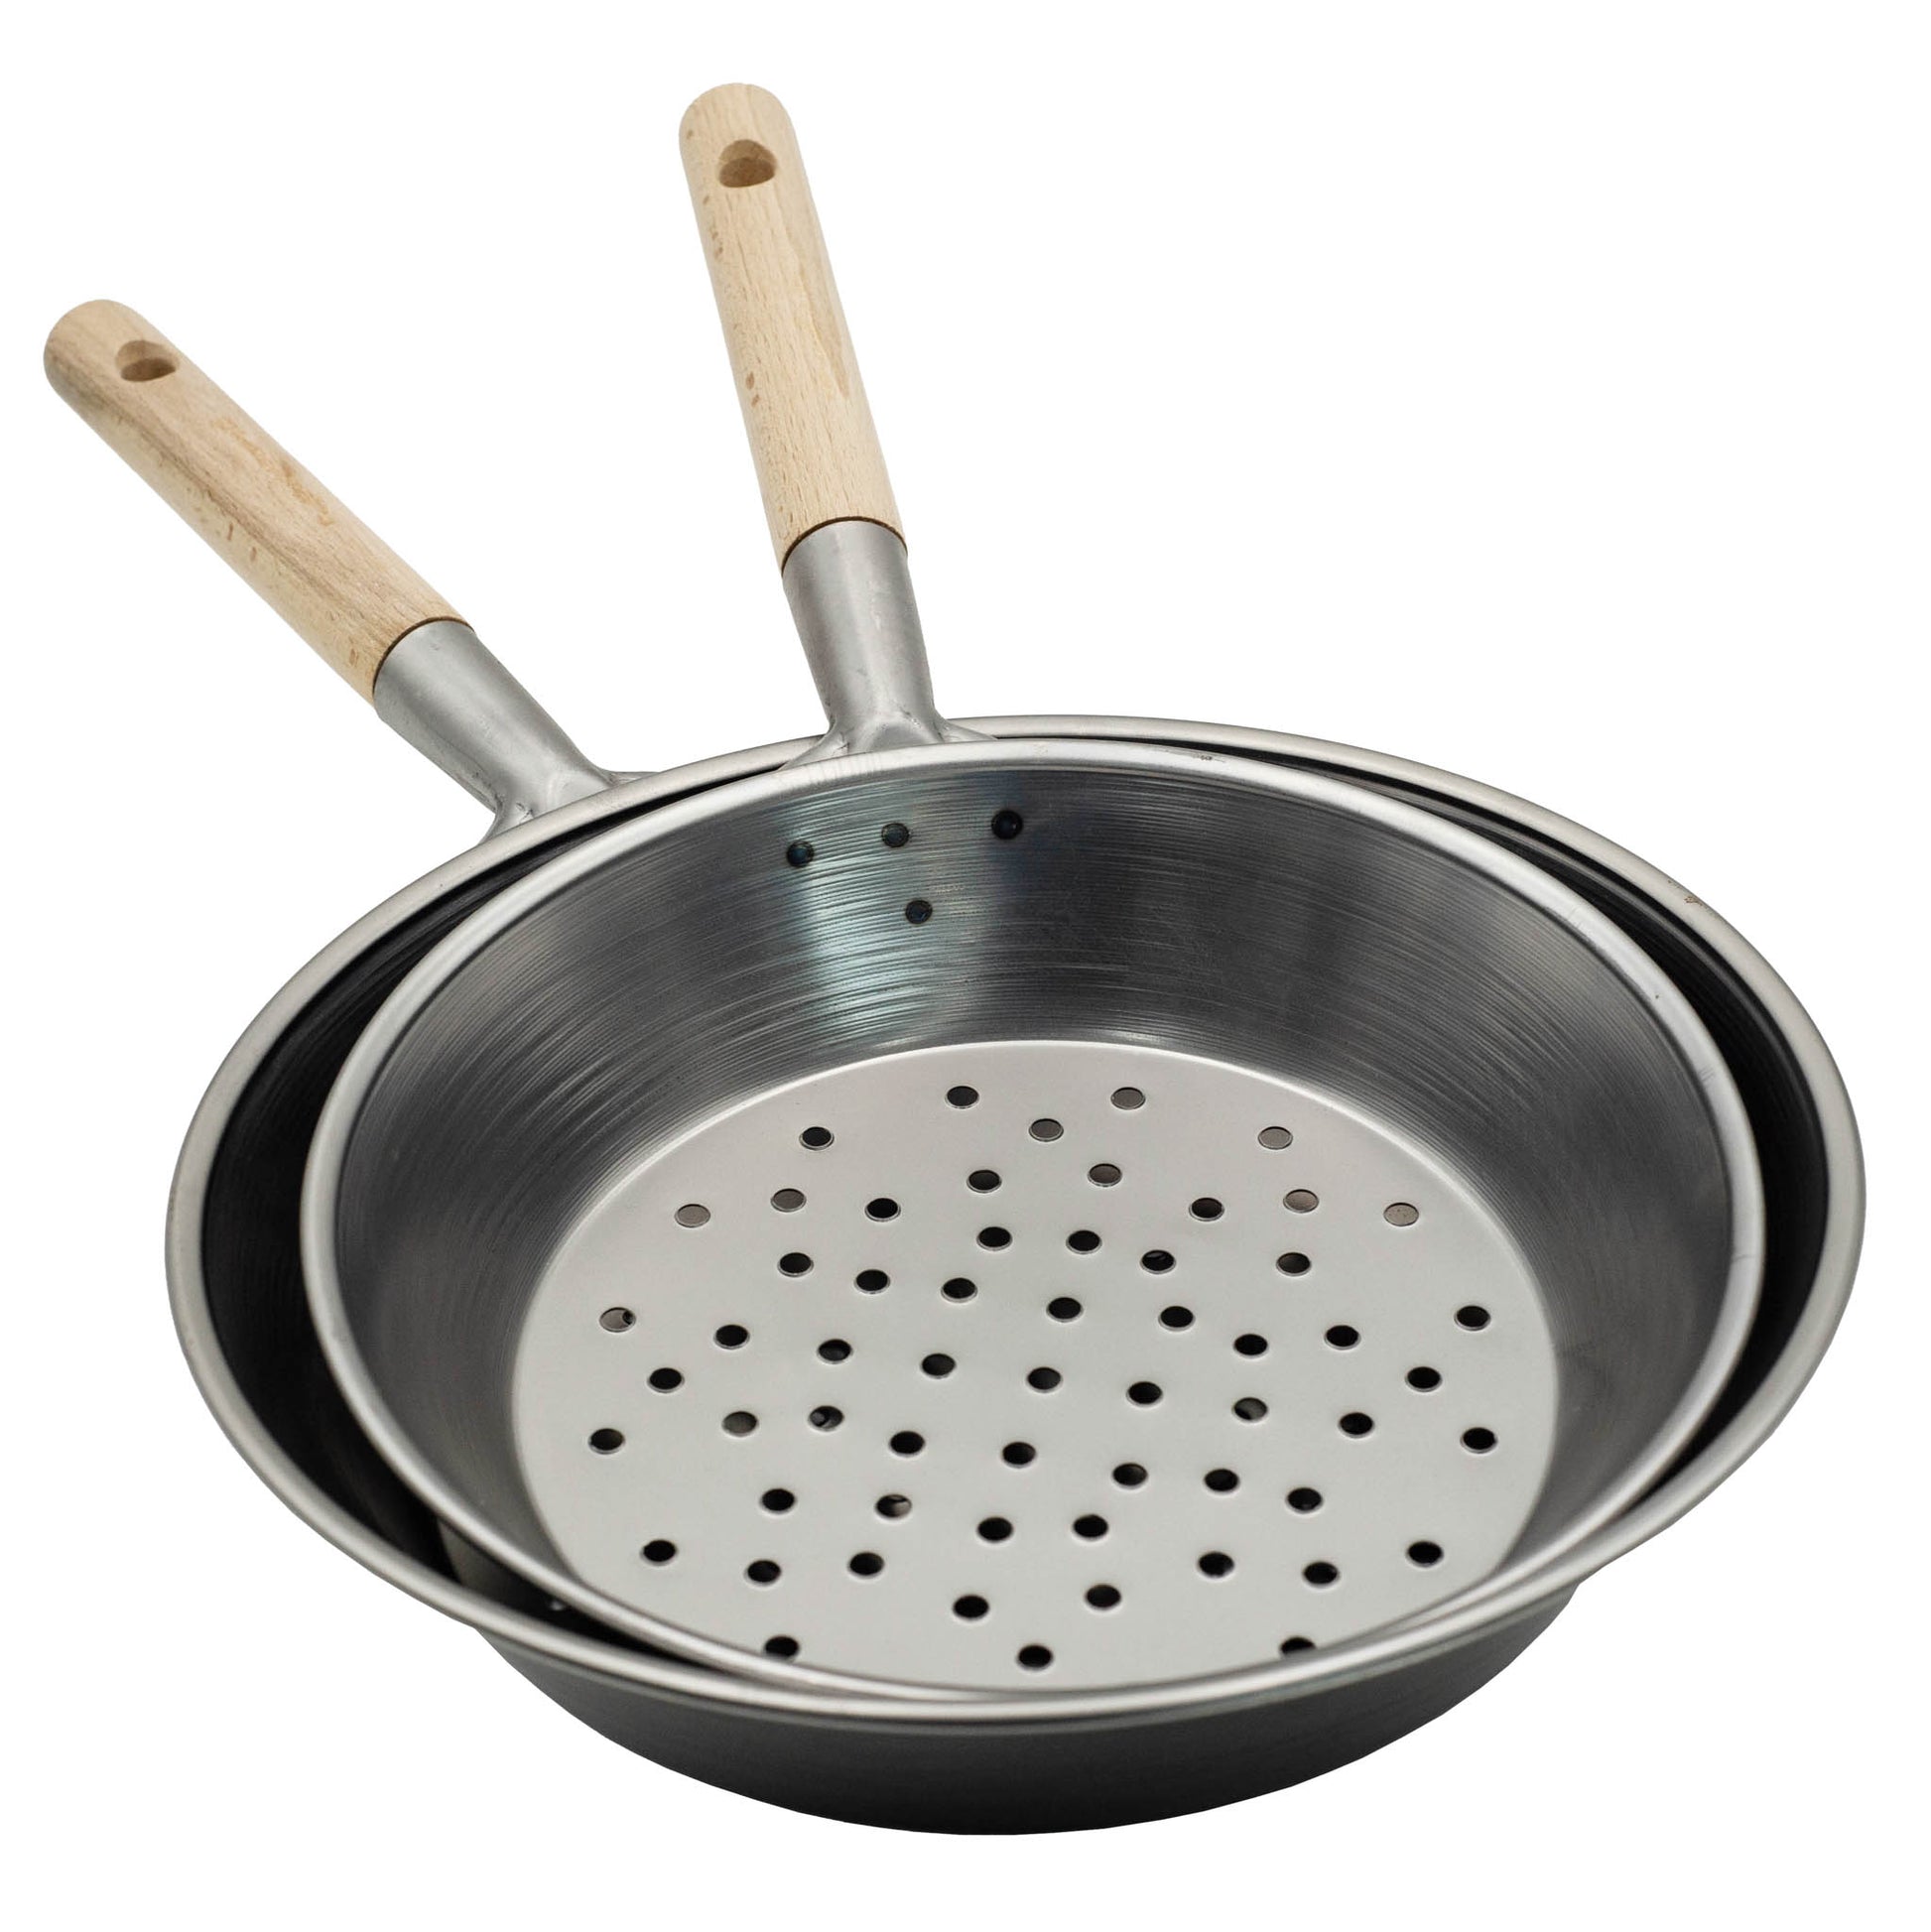 Chestnut roasting pan, 27cm with perforated metal base and wooden handle.